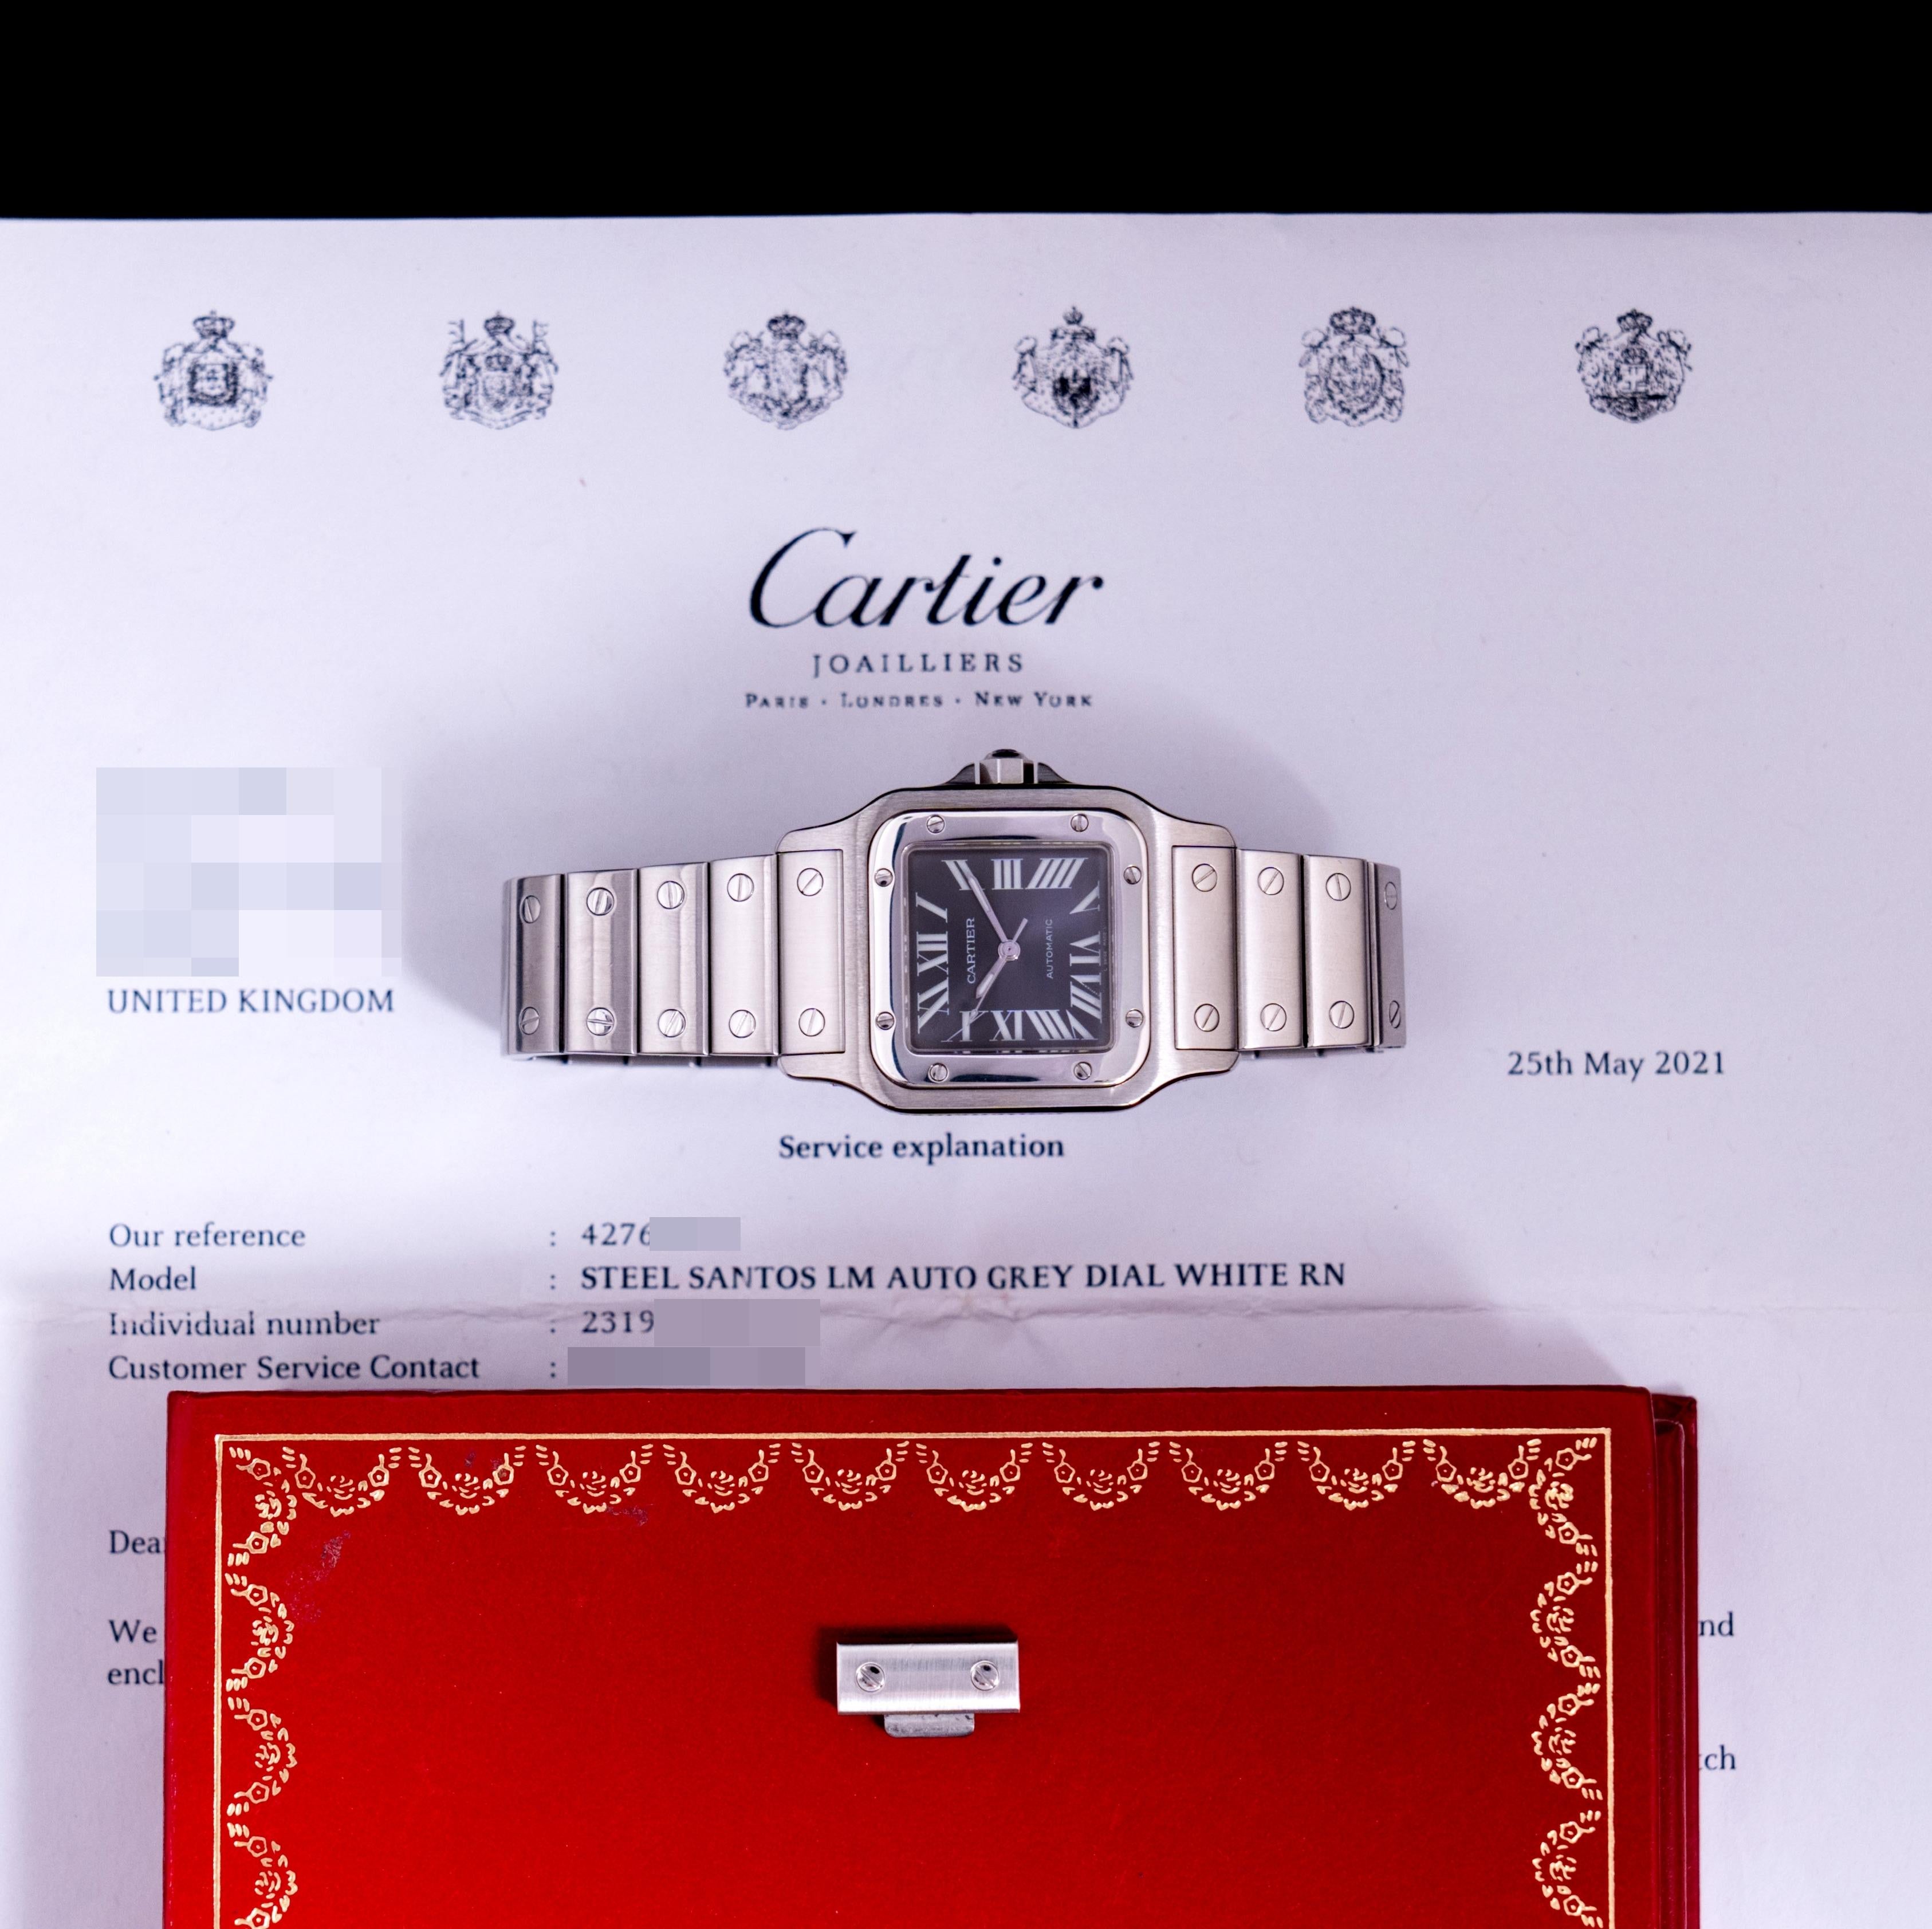 Brand: Cartier
Model: Santos Galbée 2319
Year: 2002
Serial Number: 949xxxxx
Reference: C03912

Introducing the Cartier Santos Galbée 2319 Limited Edition. Released at the 2002 SIHH tradeshow in Singapore it was limited to just 2000 pieces. As a